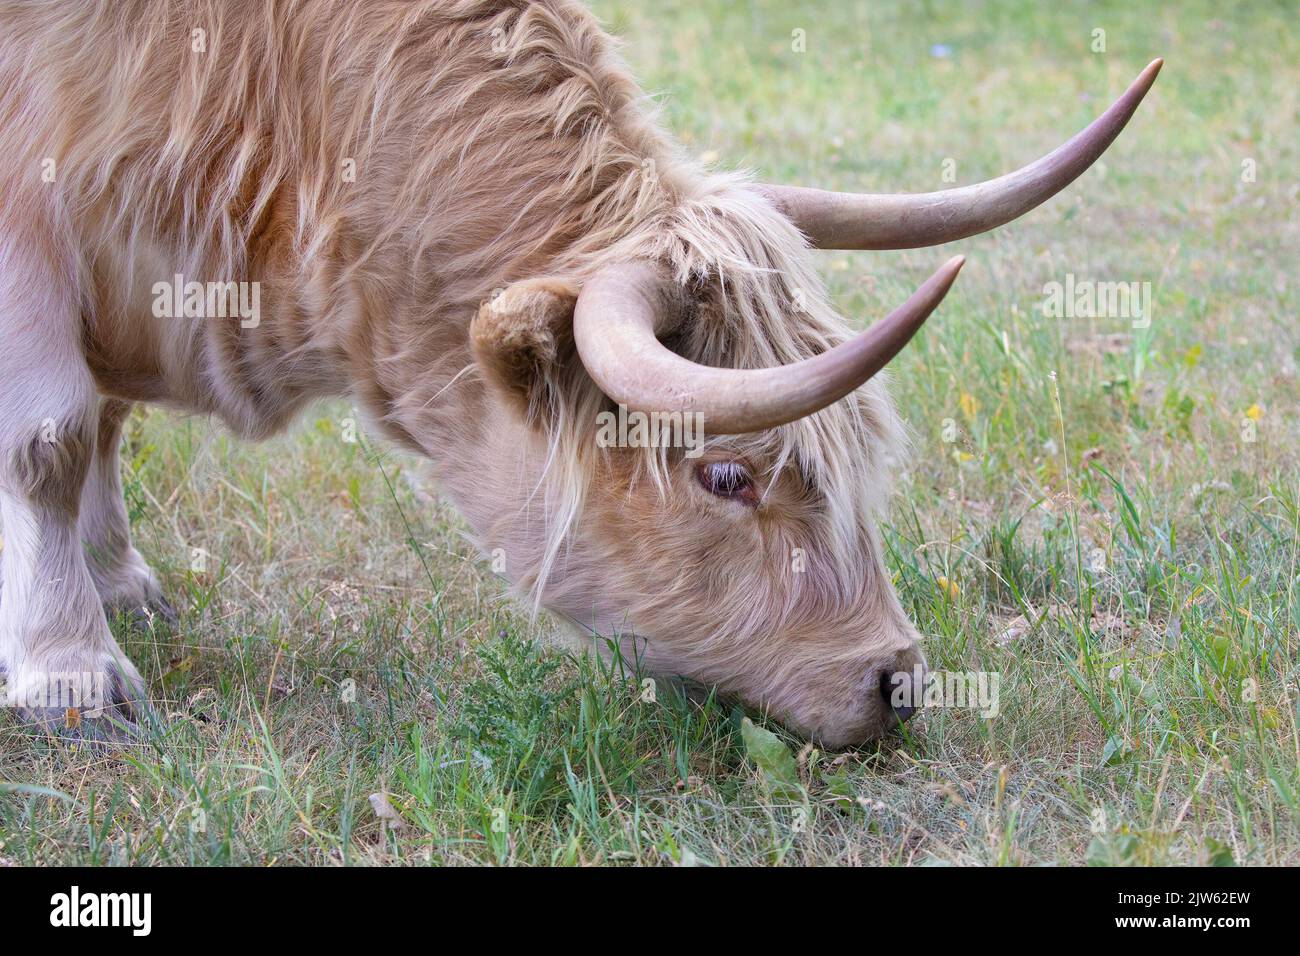 Highland cow grazing on pasture grasses, close up of face and horns Stock Photo